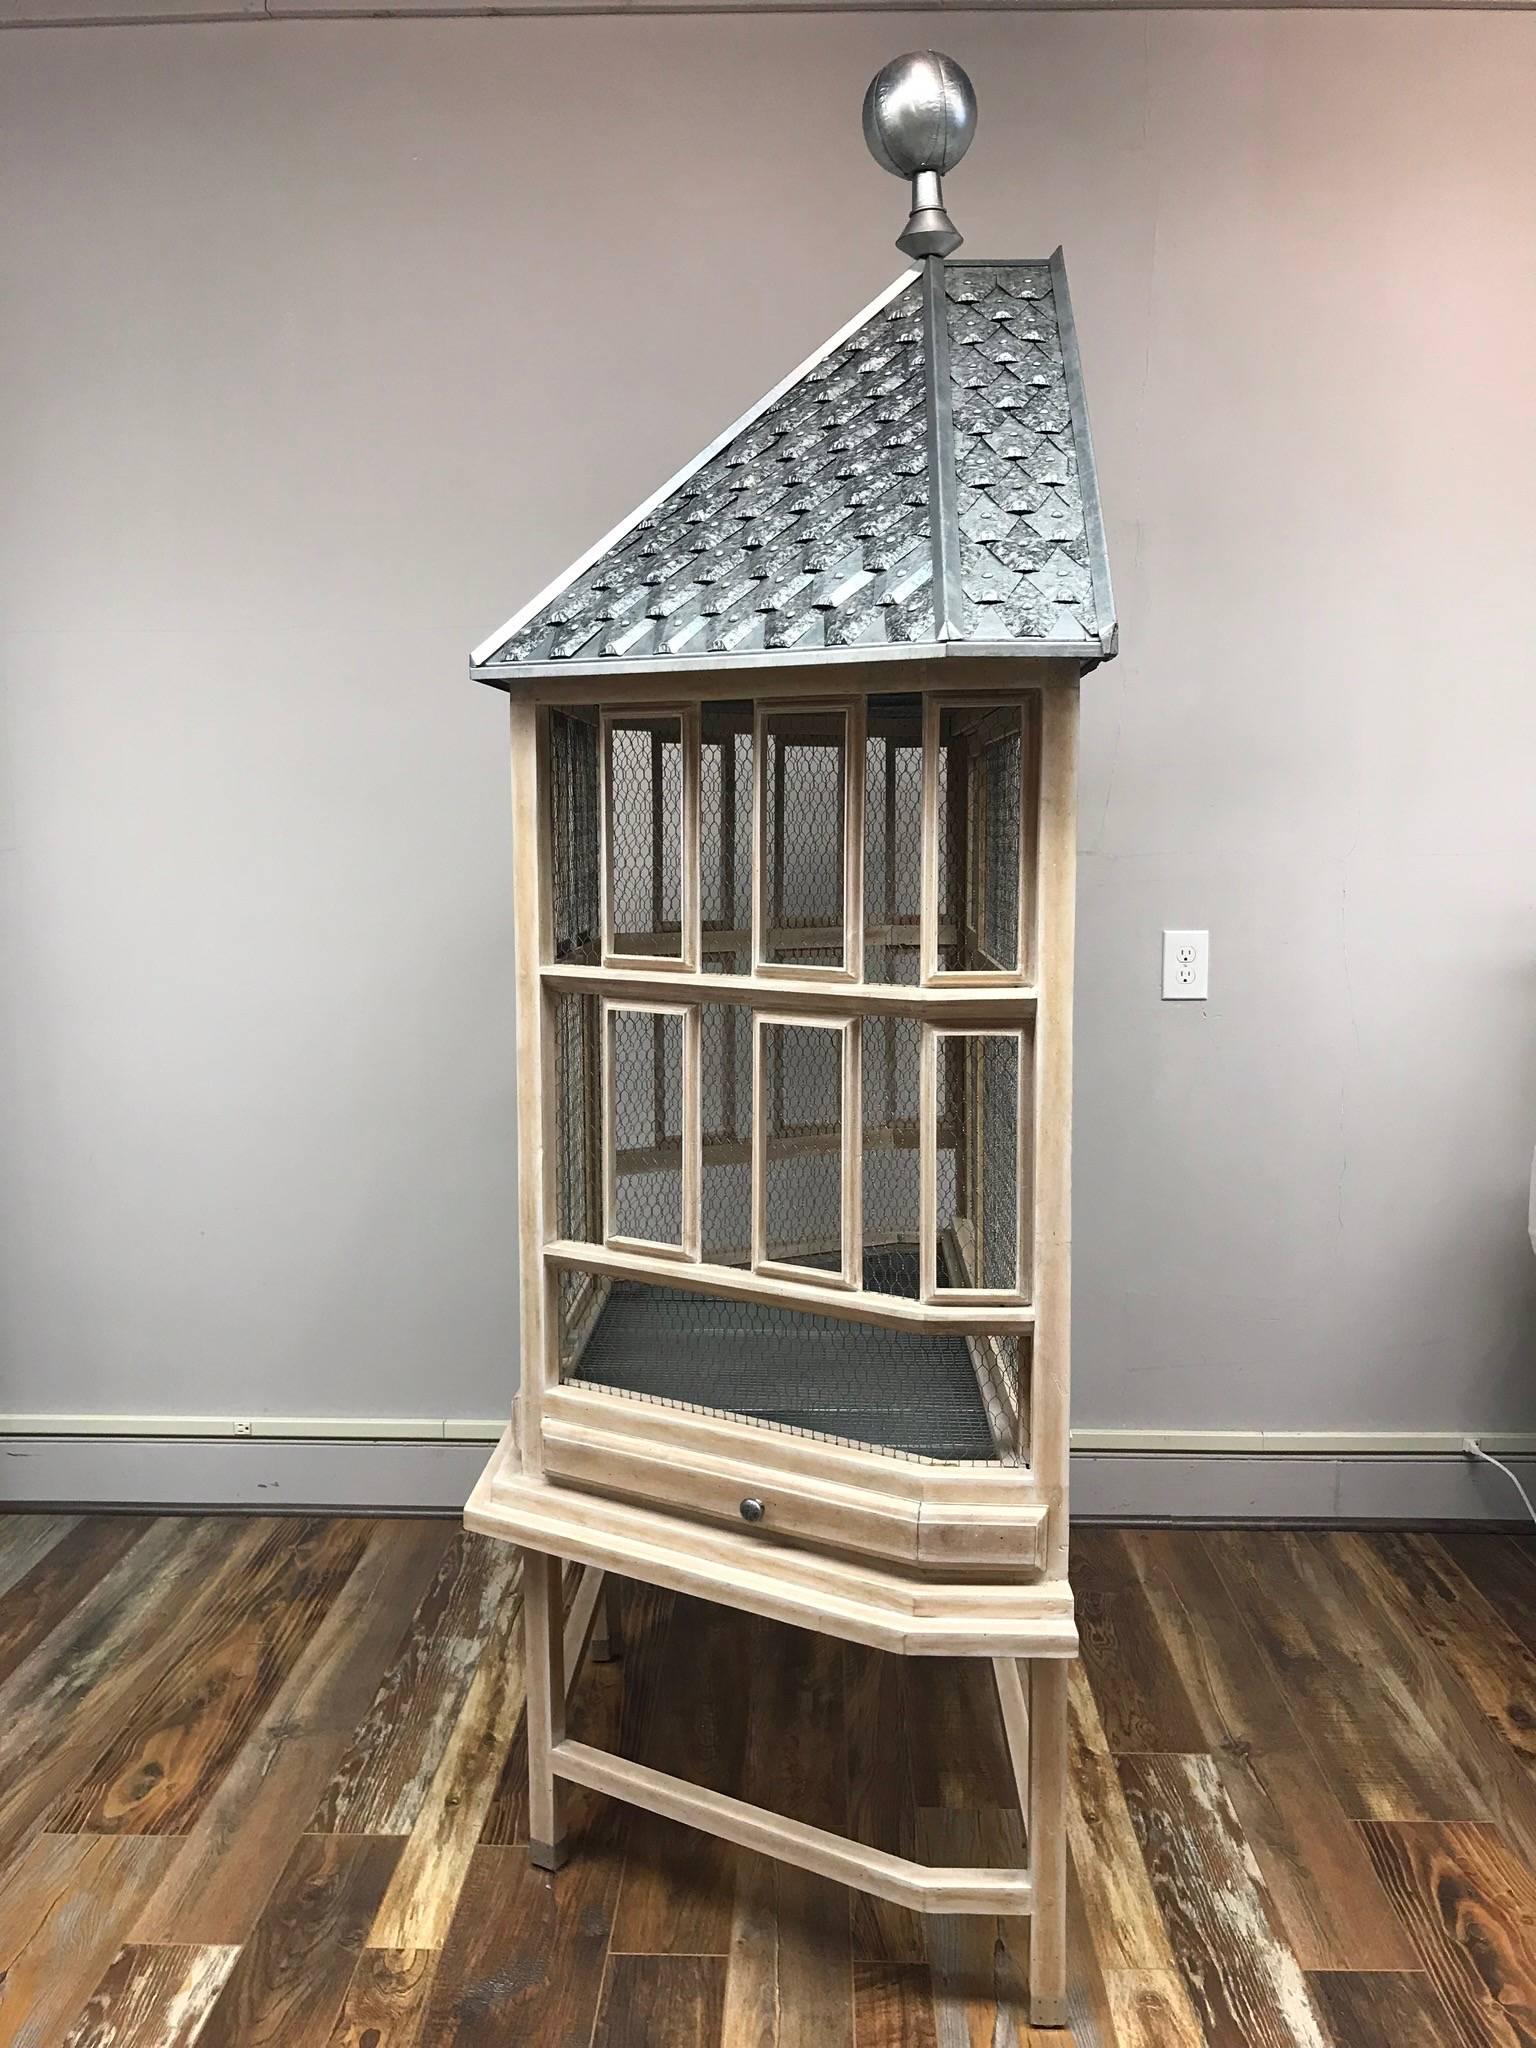 A wood-and-metal bird cage topped with a charming metal tile “roof” and finial that would be perfect for filling with ferns and other plants. Open the chicken wire doors and embrace a world of fun. A true statement piece for any room. White-washed